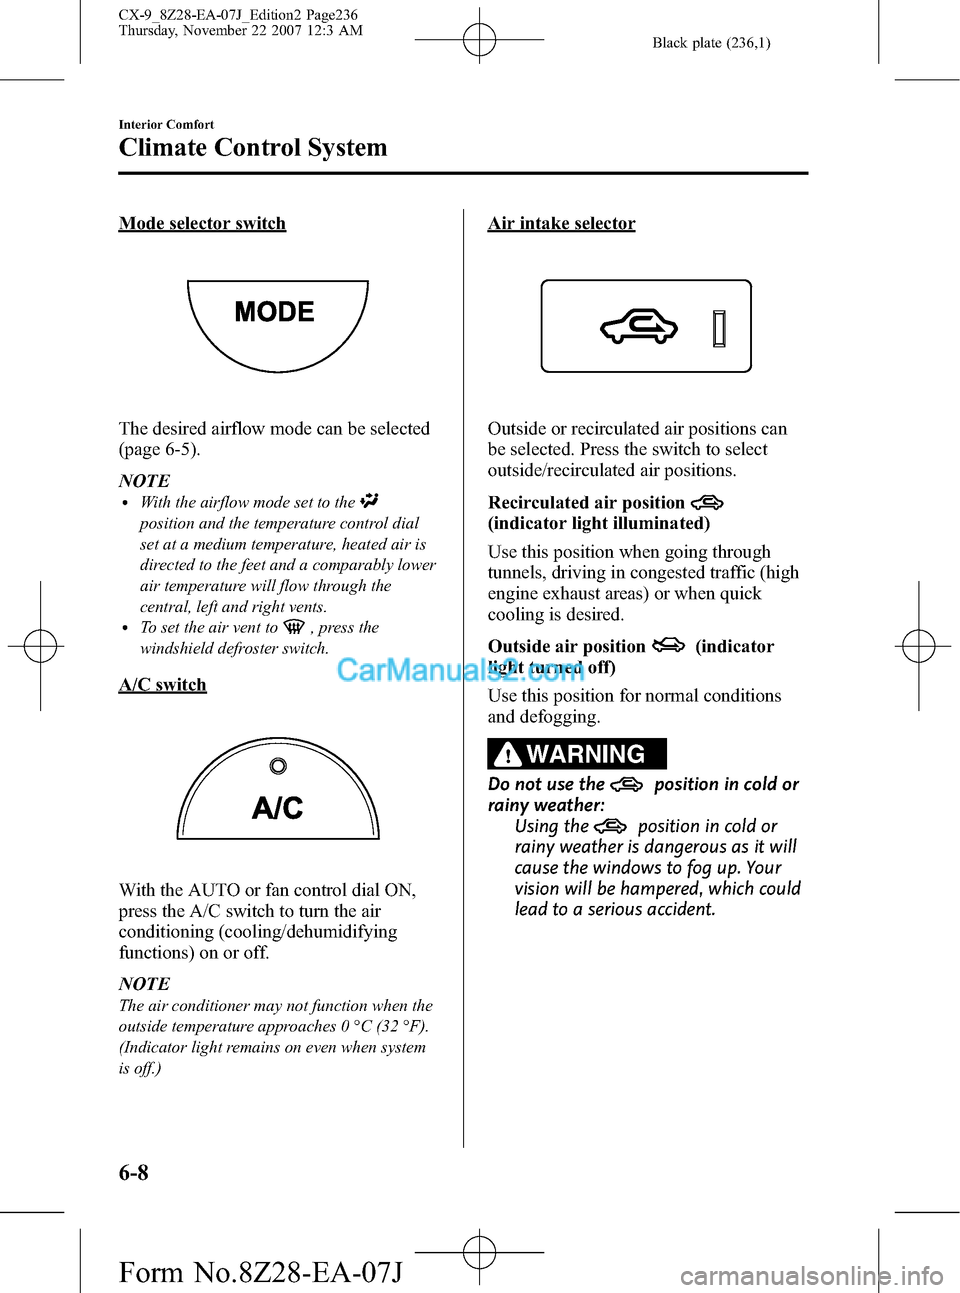 MAZDA MODEL CX-9 2008   (in English) Owners Manual Black plate (236,1)
Mode selector switch
The desired airflow mode can be selected
(page 6-5).
NOTE
lWith the airflow mode set to the
position and the temperature control dial
set at a medium temperatu